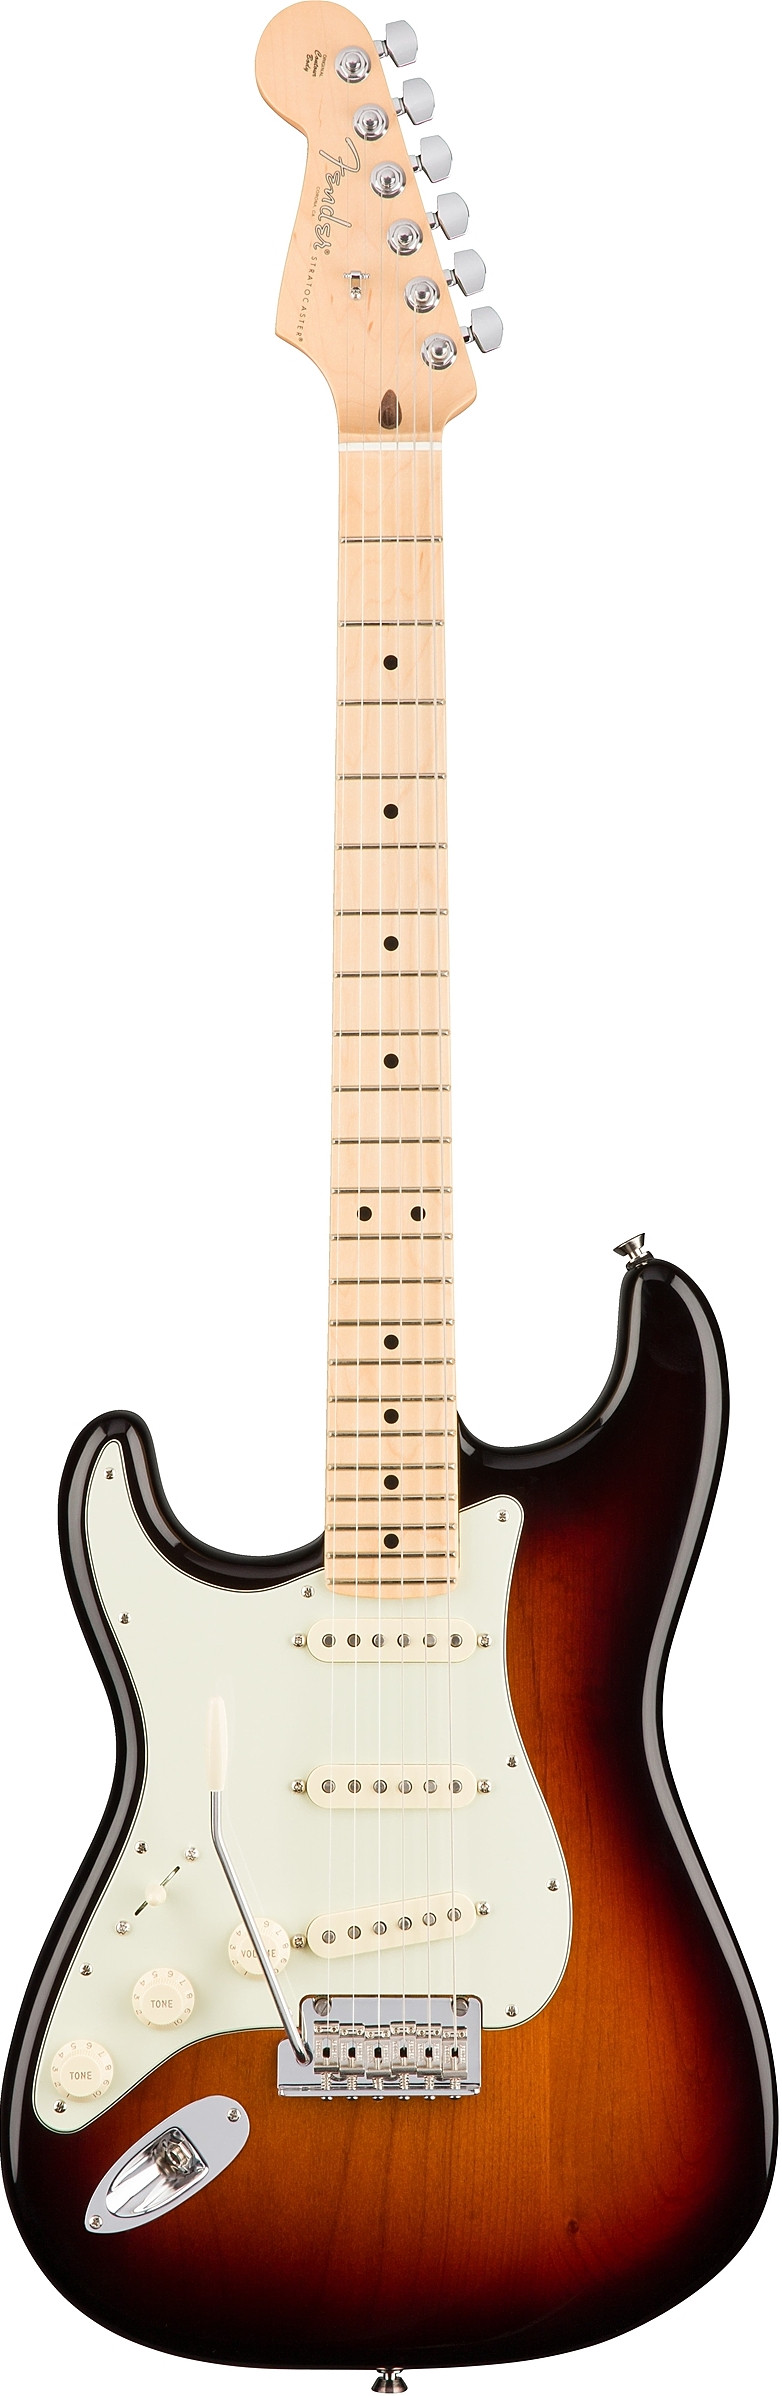 American Professional Stratocaster Left Hand by Fender